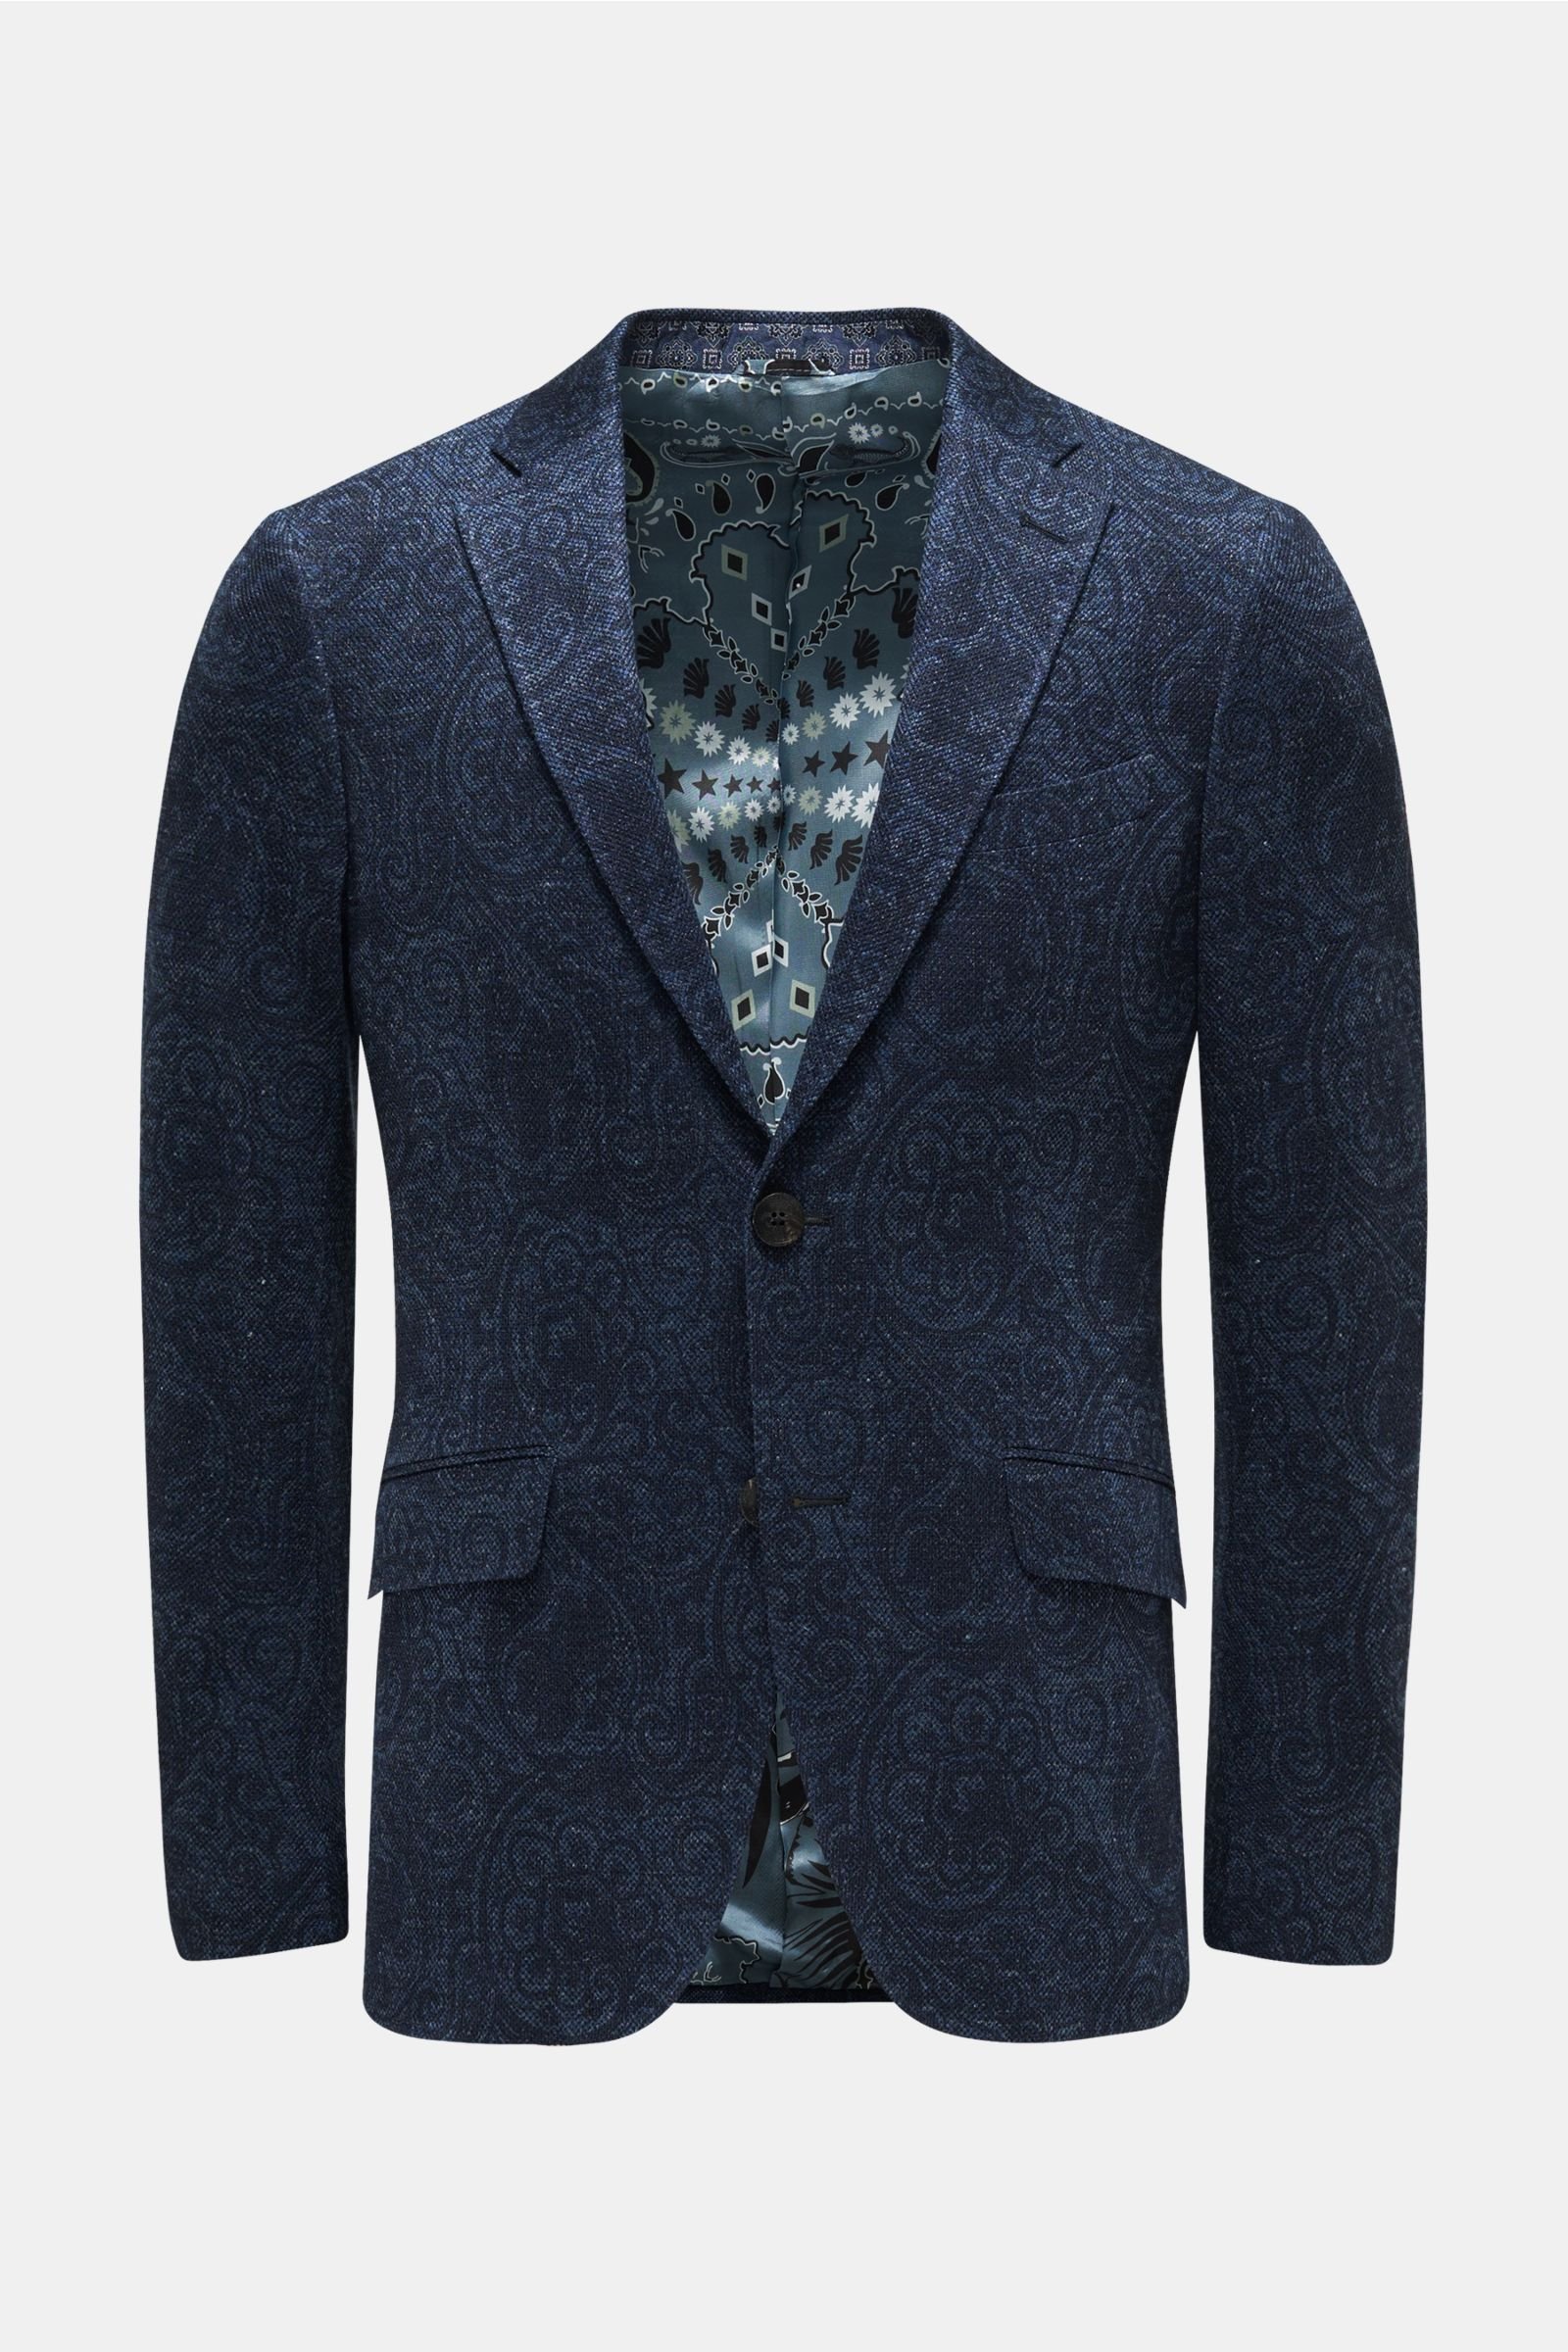 Smart-casual jacket navy patterned